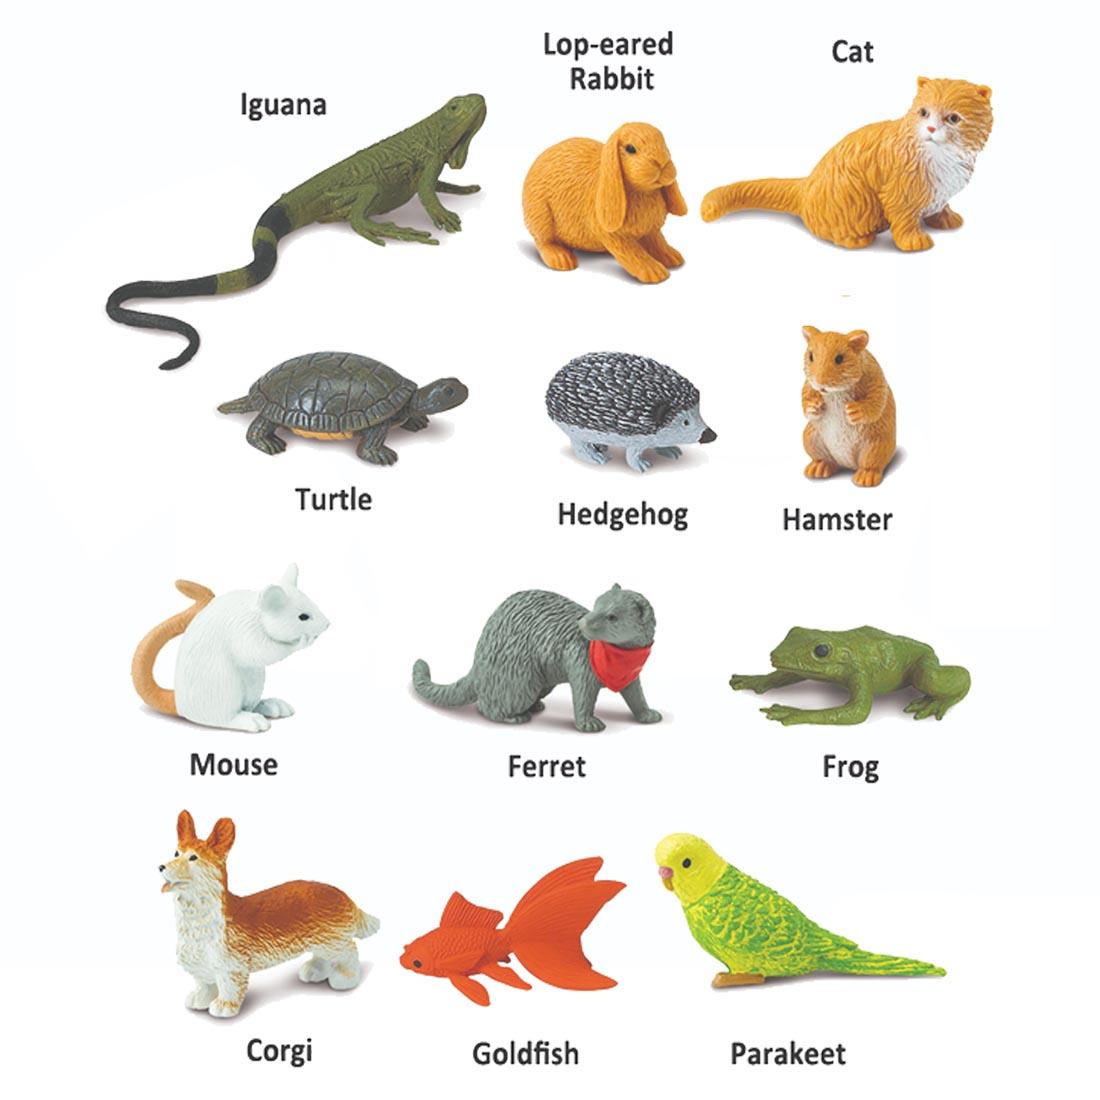 12 creatures from the Pets Figurine Set labeled with their names: iguana, lop-eared rabbit, cat, turtle, hedgehog, hamster, mouse, ferret, frog, corgi, goldfish and parakeet